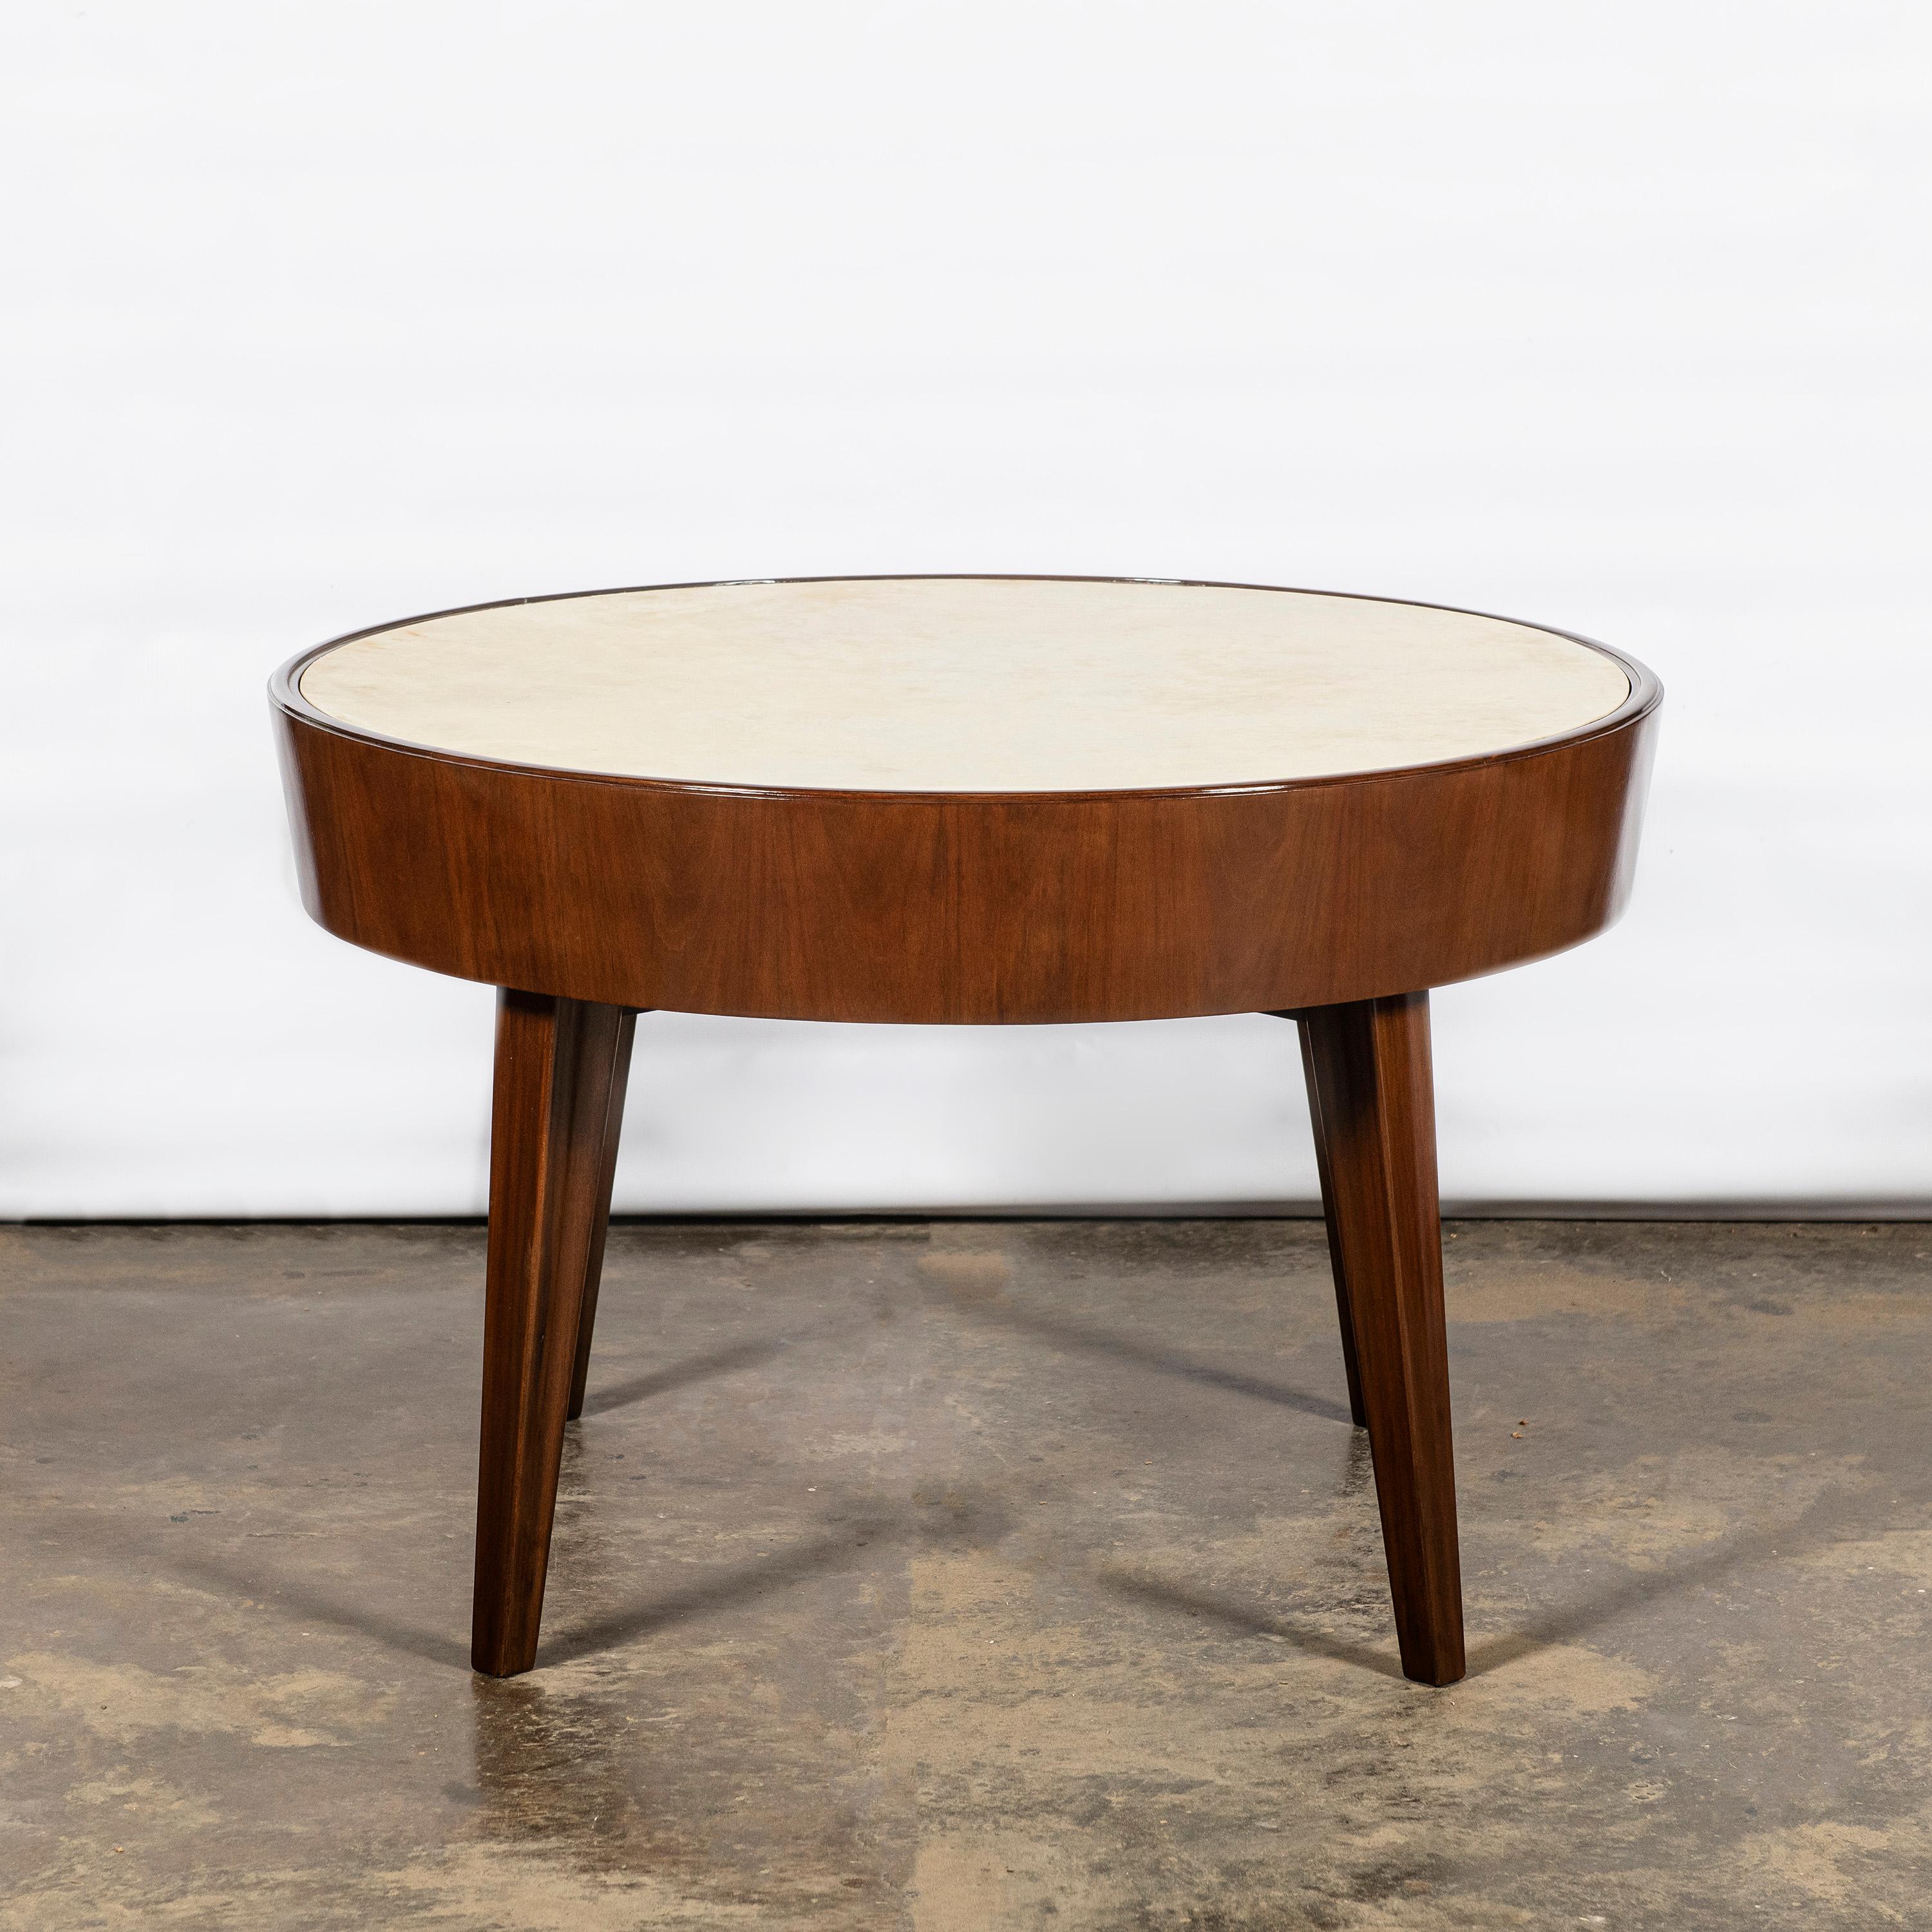 Wood and parchment low round table by Comte. Argentina, Buenos Aires, circa 1950.